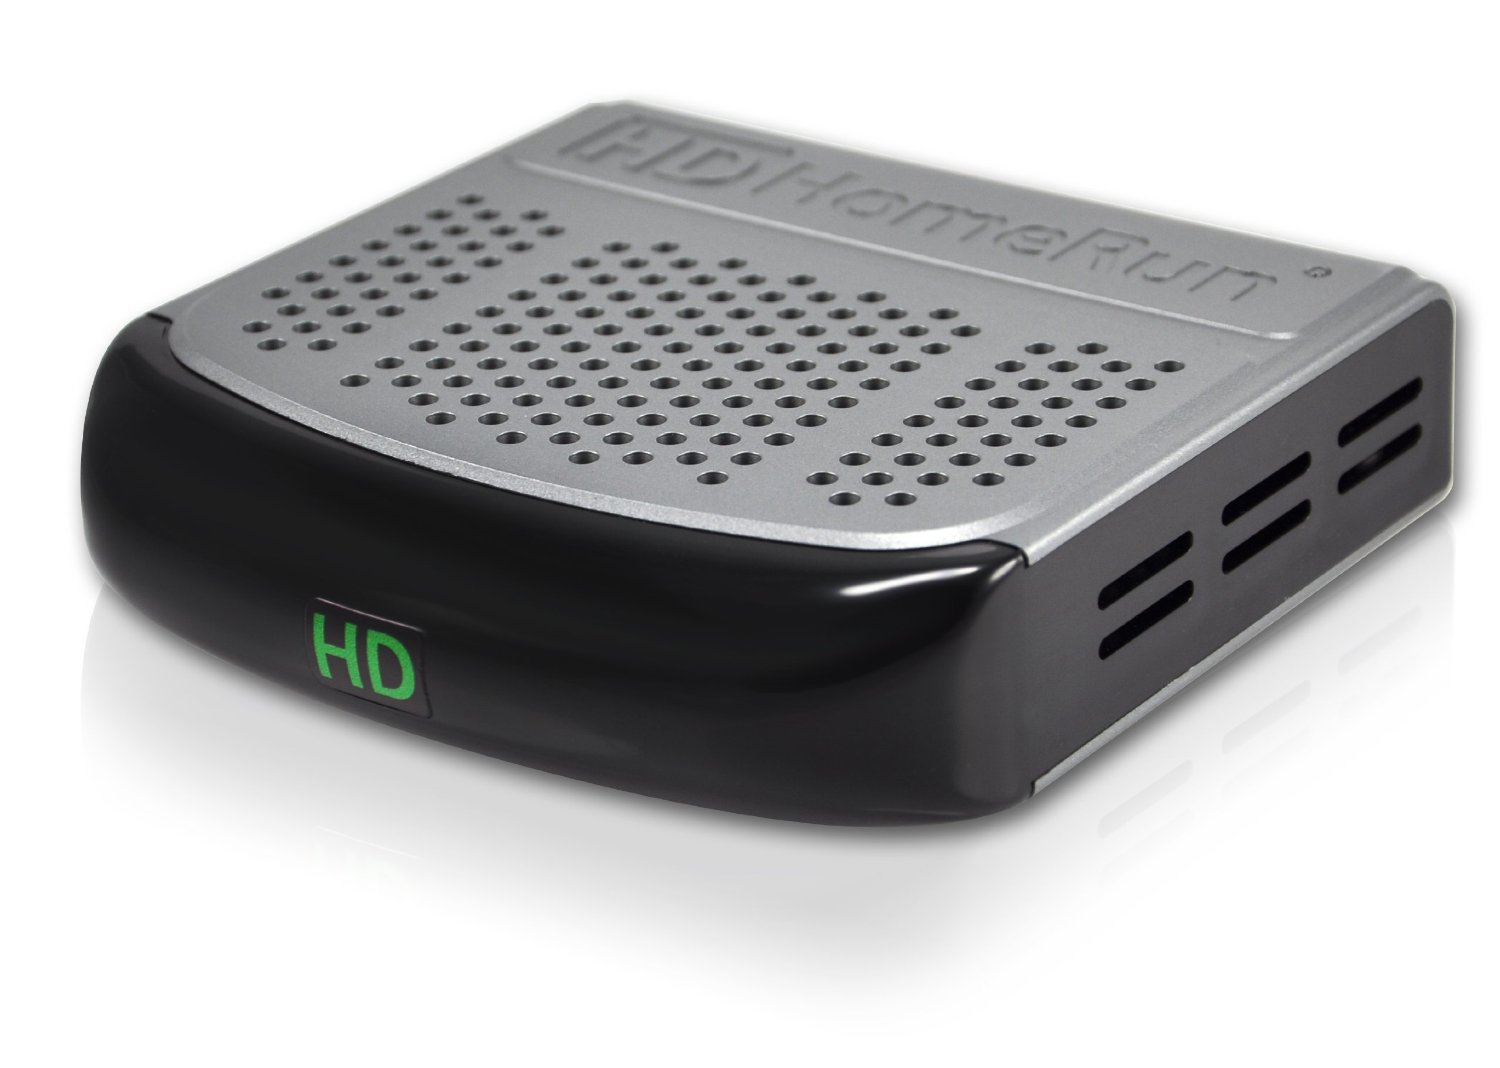 Review: SiliconDust HDHomeRun EXTEND FREE Broadcast HDTV